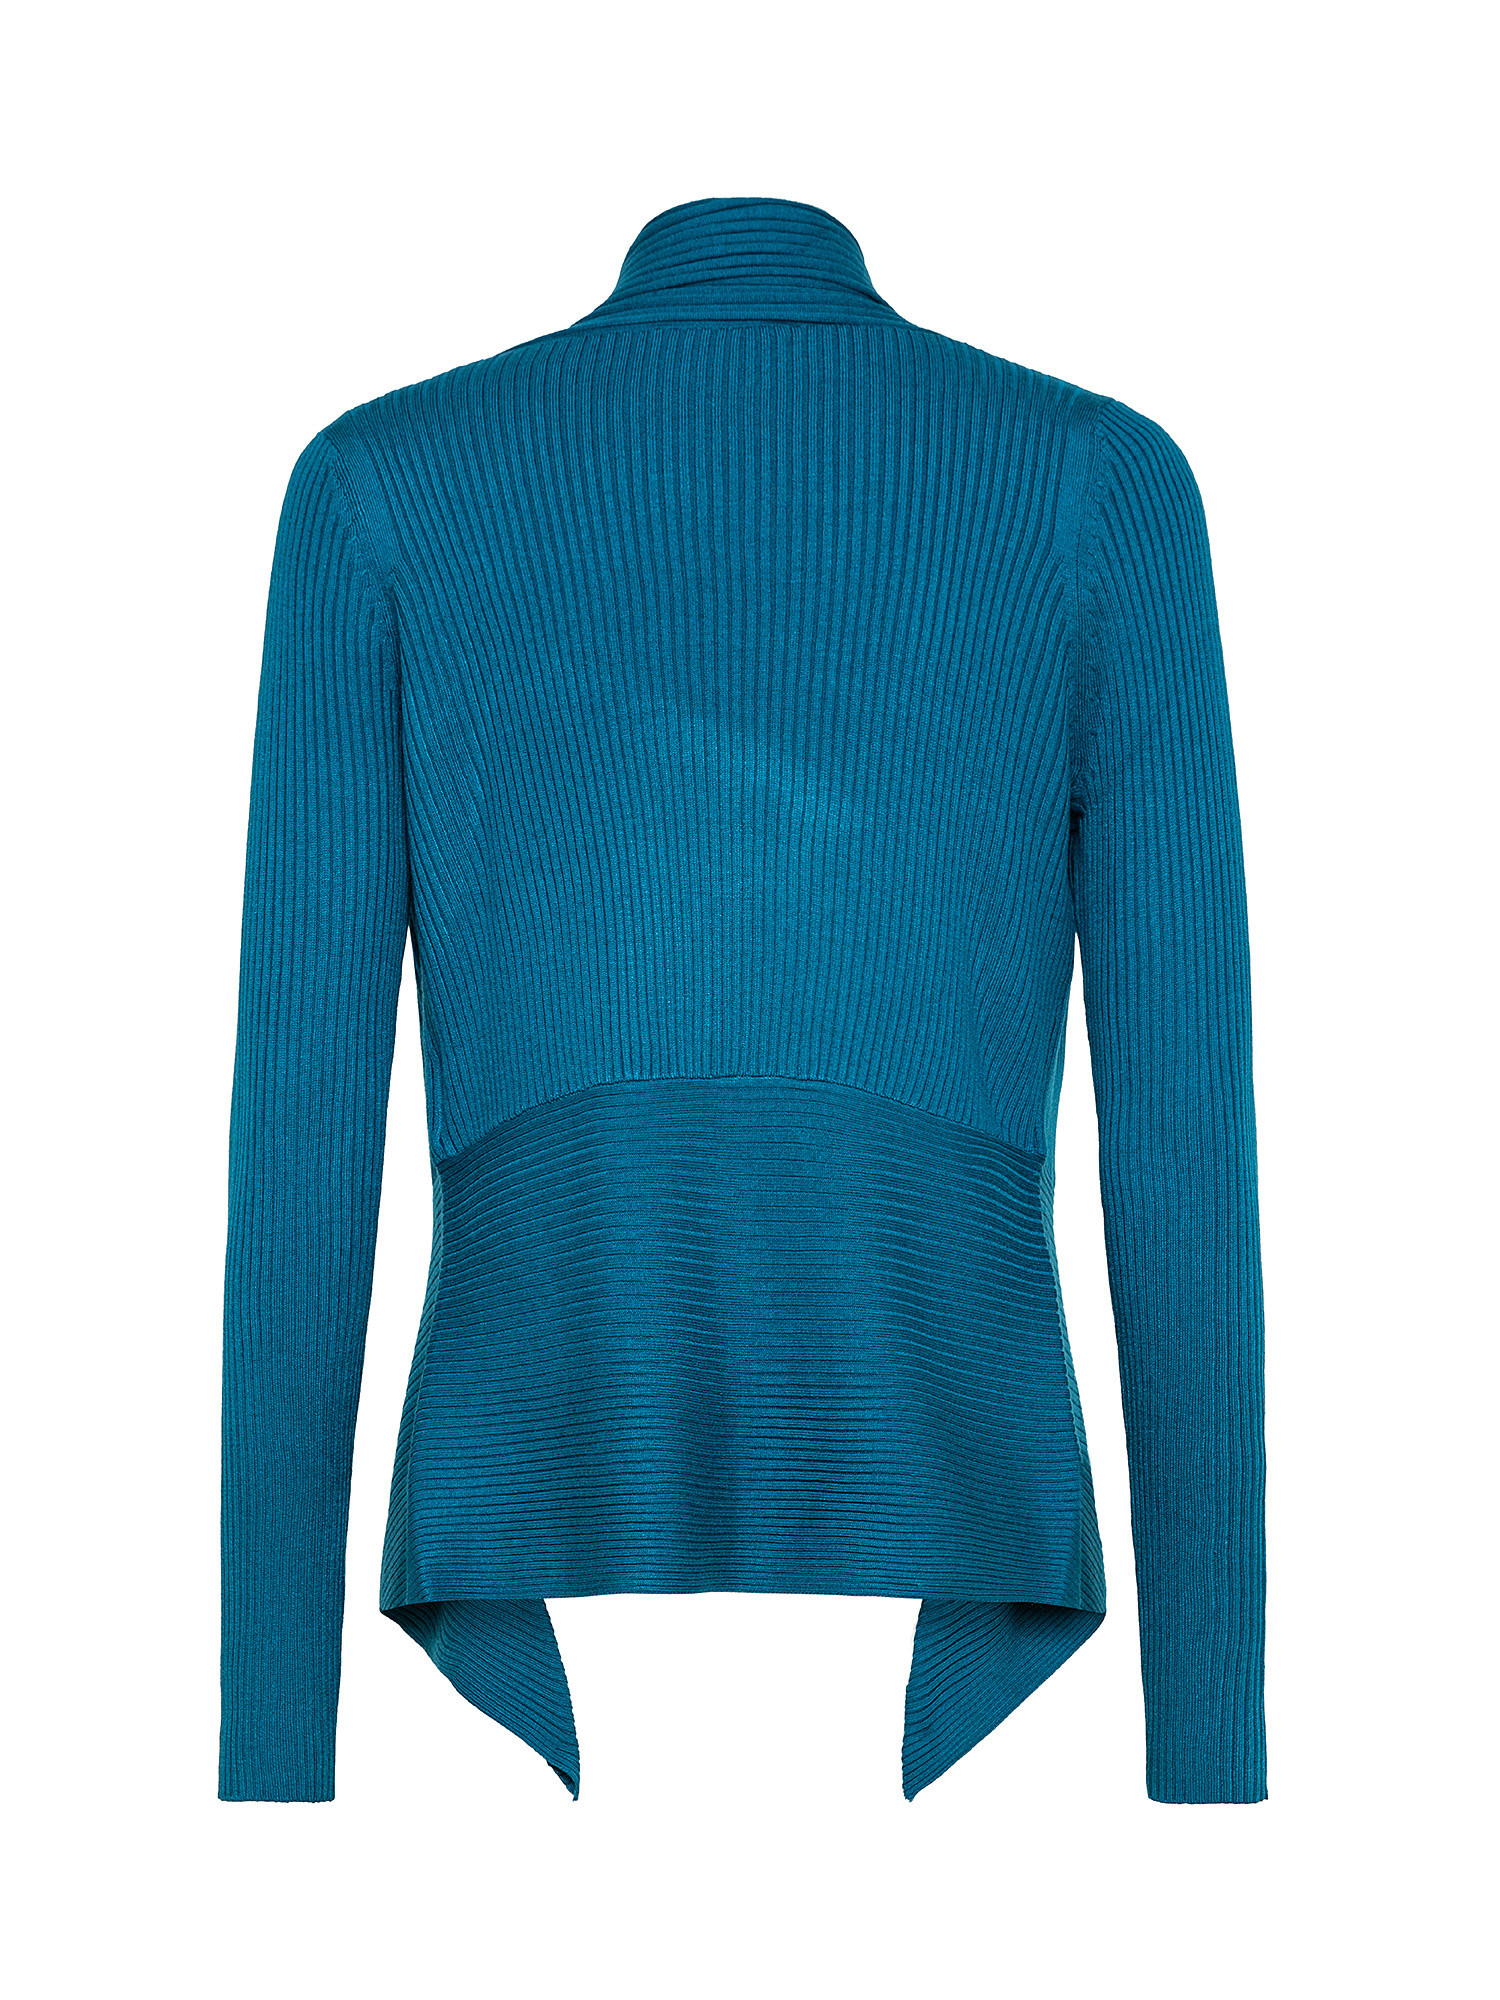 Open ribbed cardigan, Turquoise, large image number 1